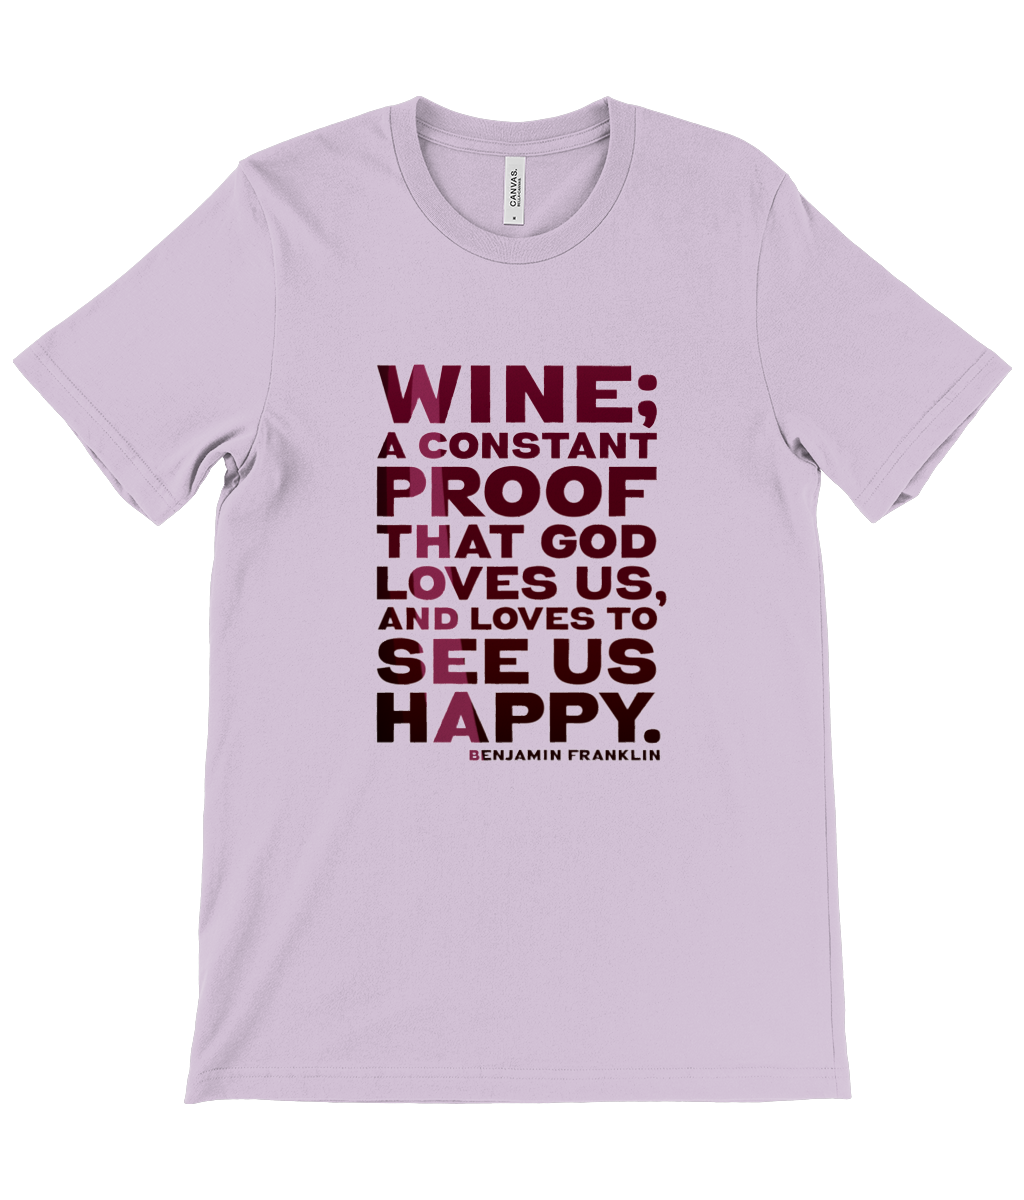 Canvas Unisex Crew Neck T-Shirt - Wine is constant proof that God loves us and likes to see us happy - Benjamin Franklin (RED)